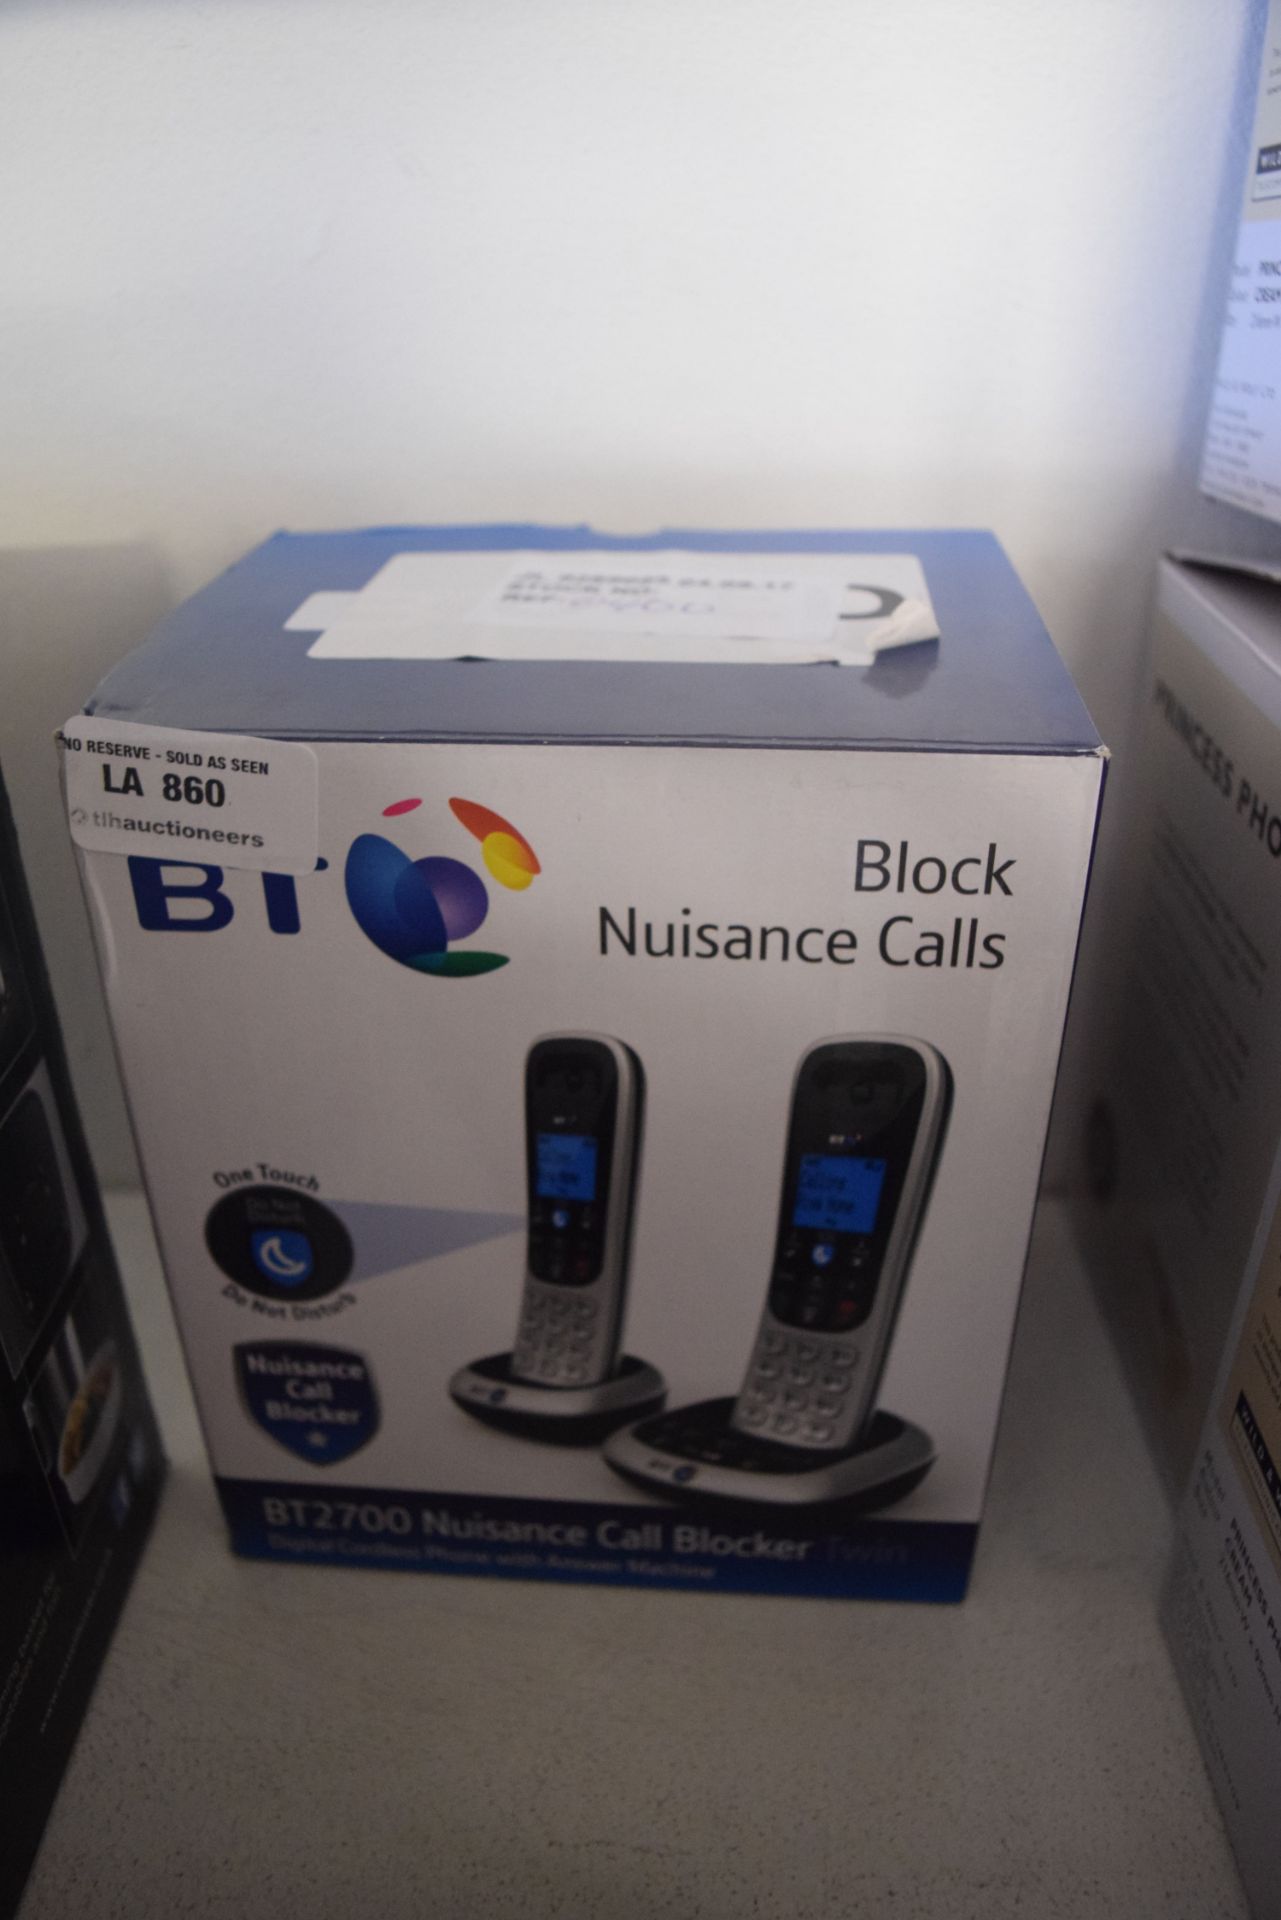 1 x BOXED BT 2700 NUISANCE CALL BLOCKER TWIN PHONE SET RRP £40 04.09.17 *PLEASE NOTE THAT THE BID